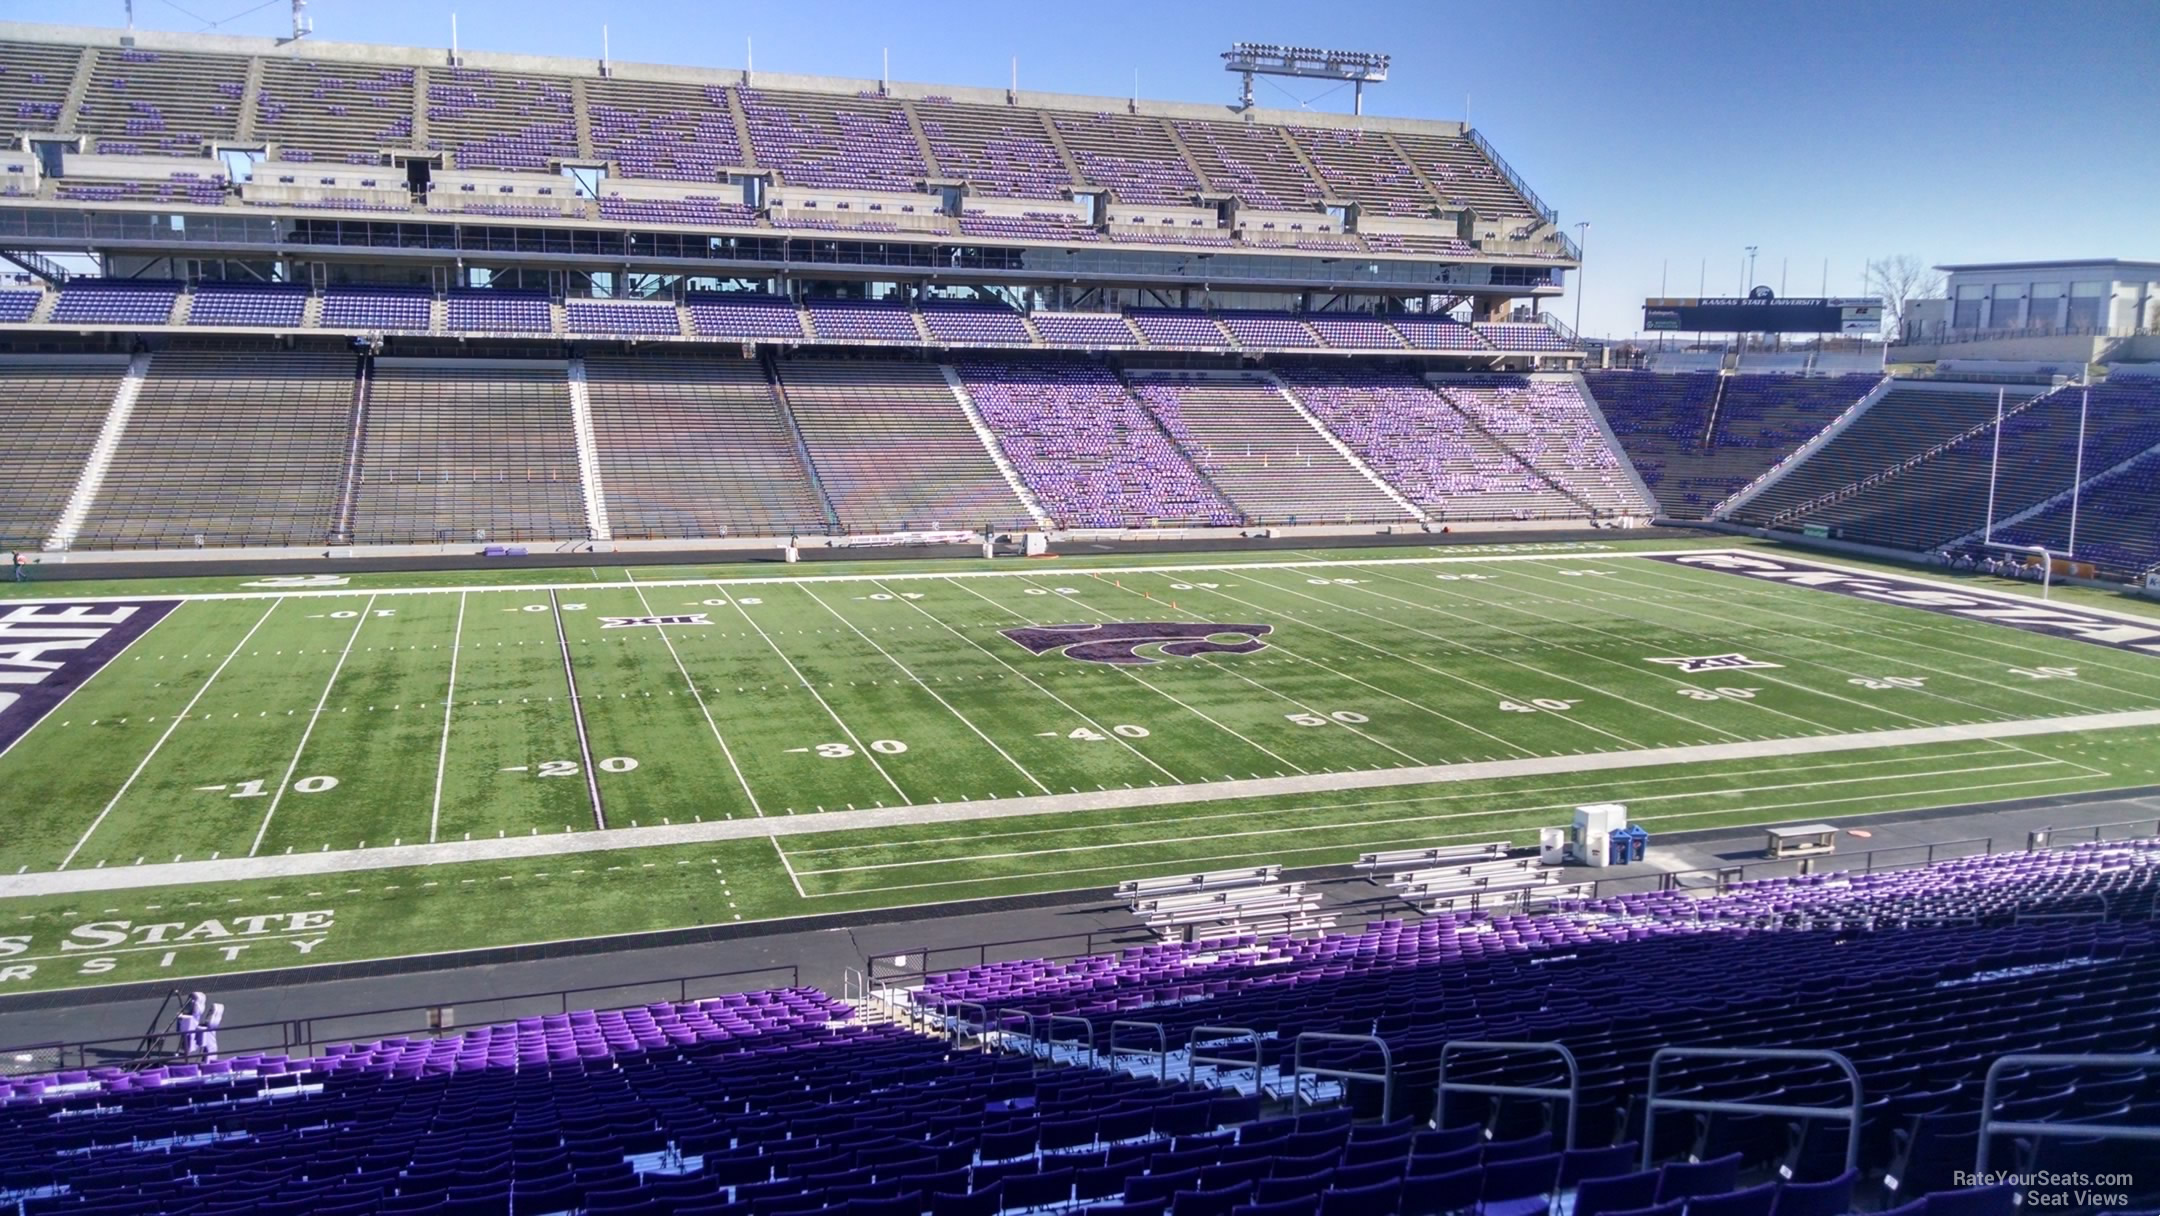 Section 3 at Bill Snyder Family Stadium - RateYourSeats.com